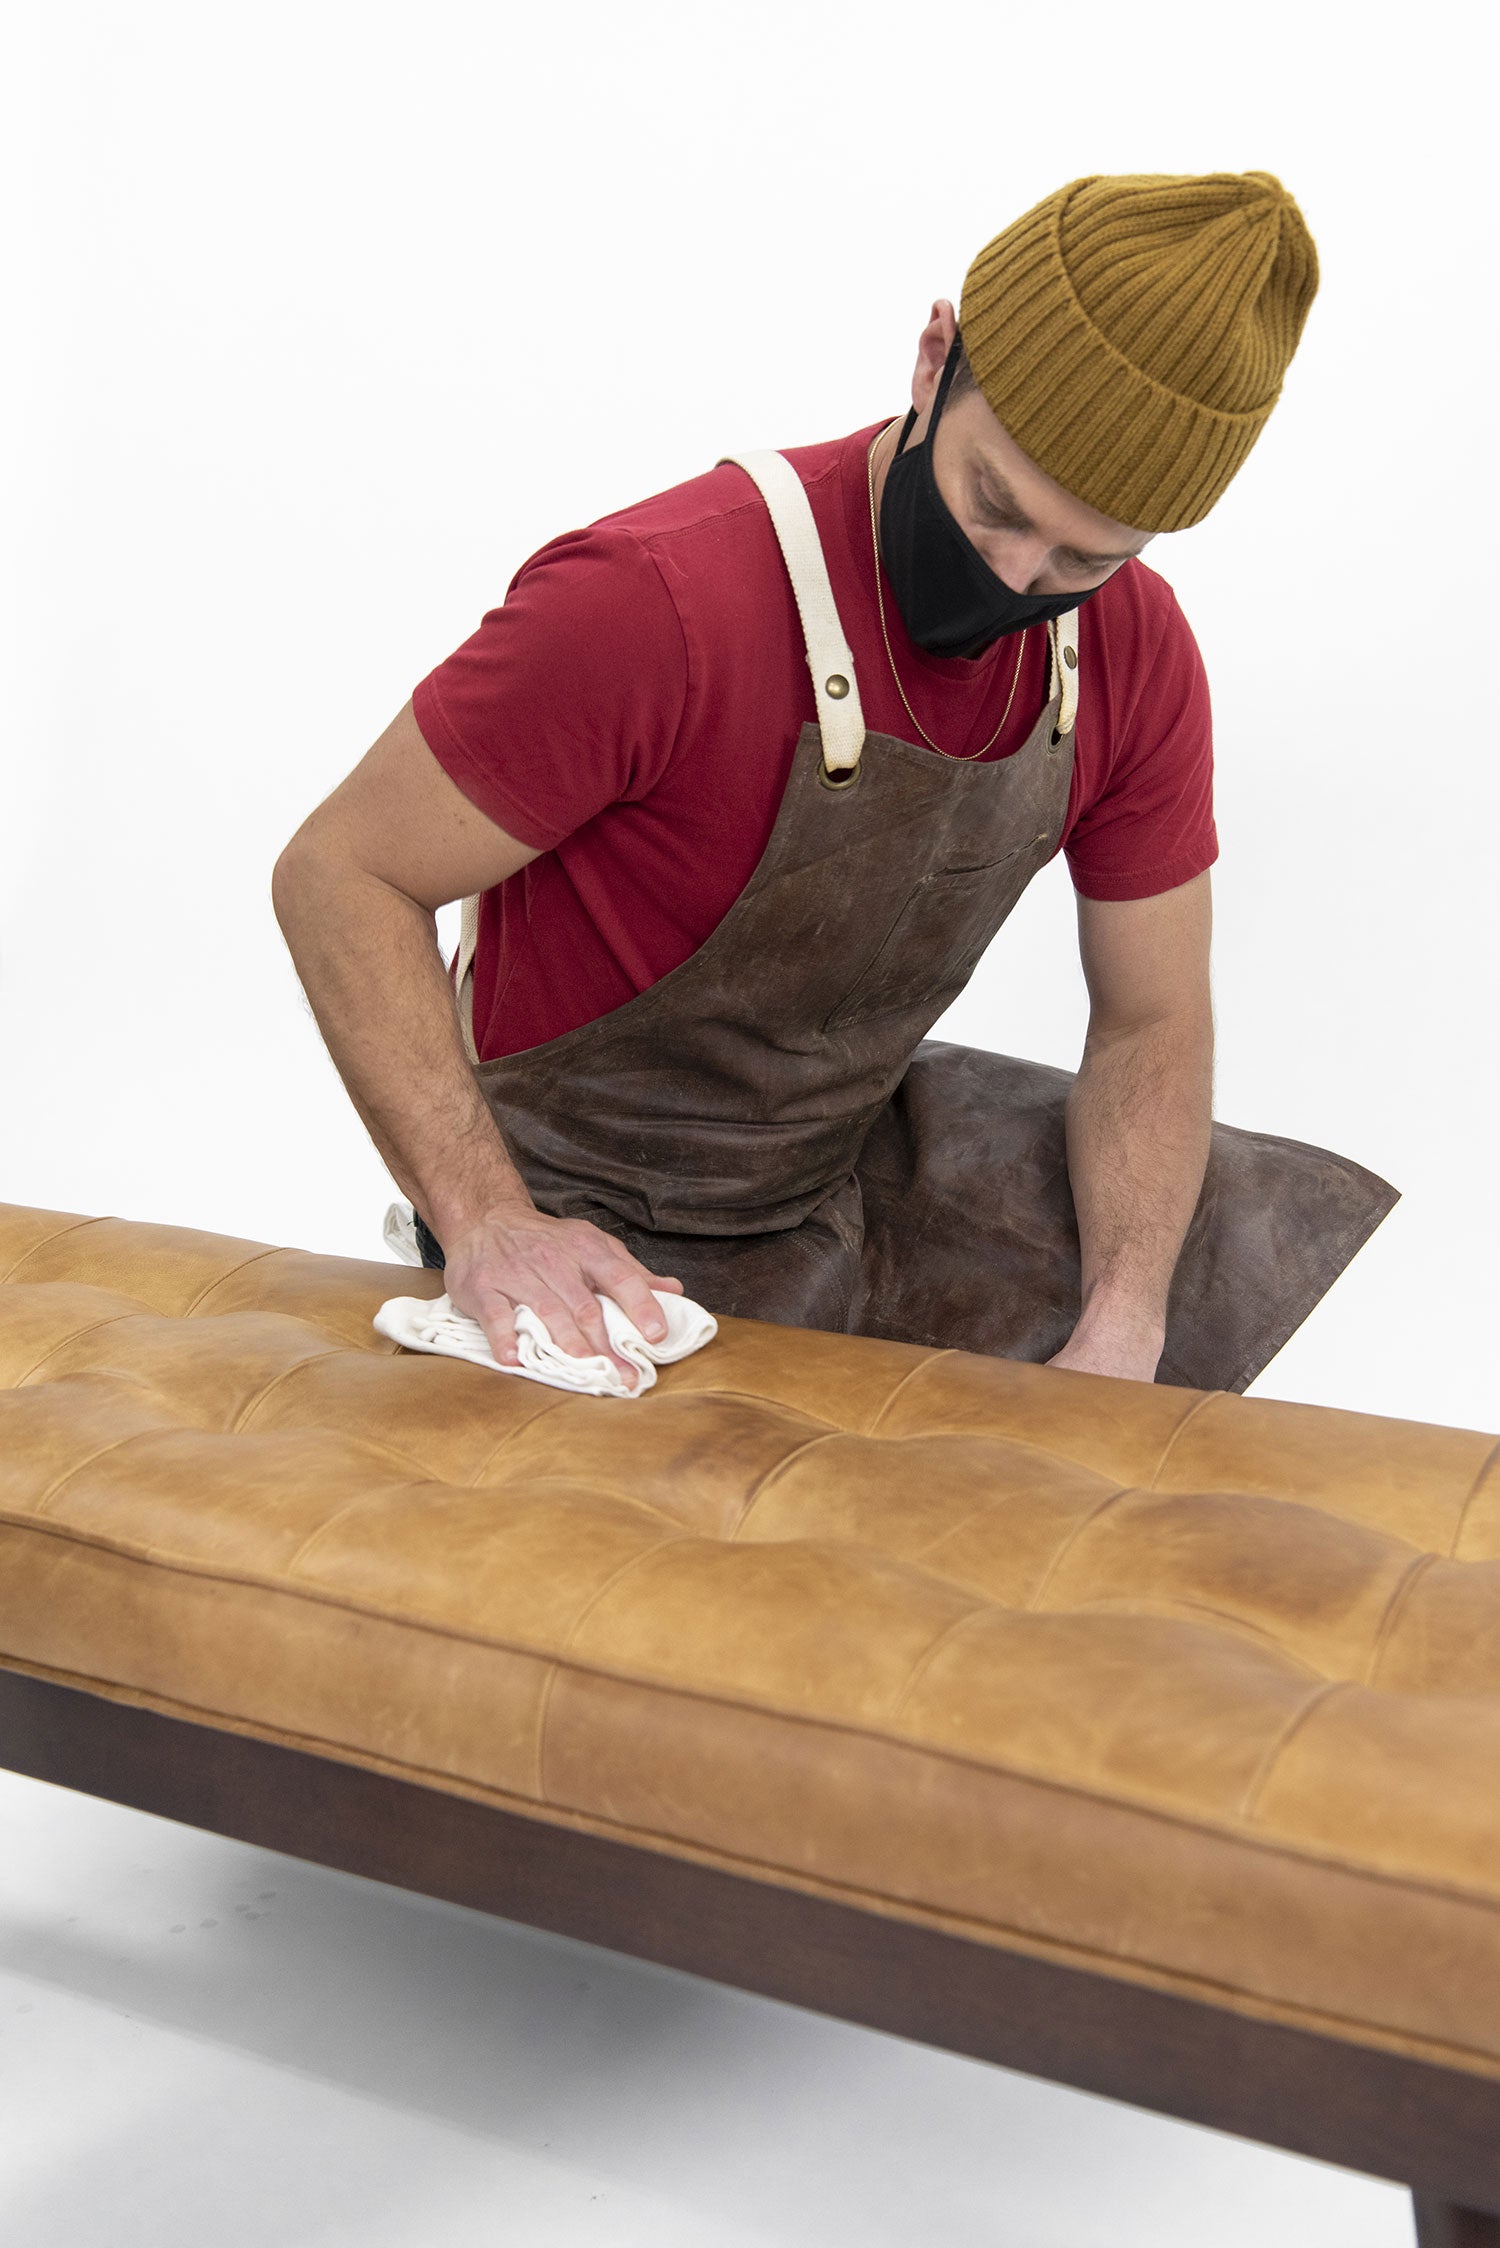 How To Care For Full-Grain Aniline or Semi-Aniline Leather Furniture With Otter Wax Leather Oil